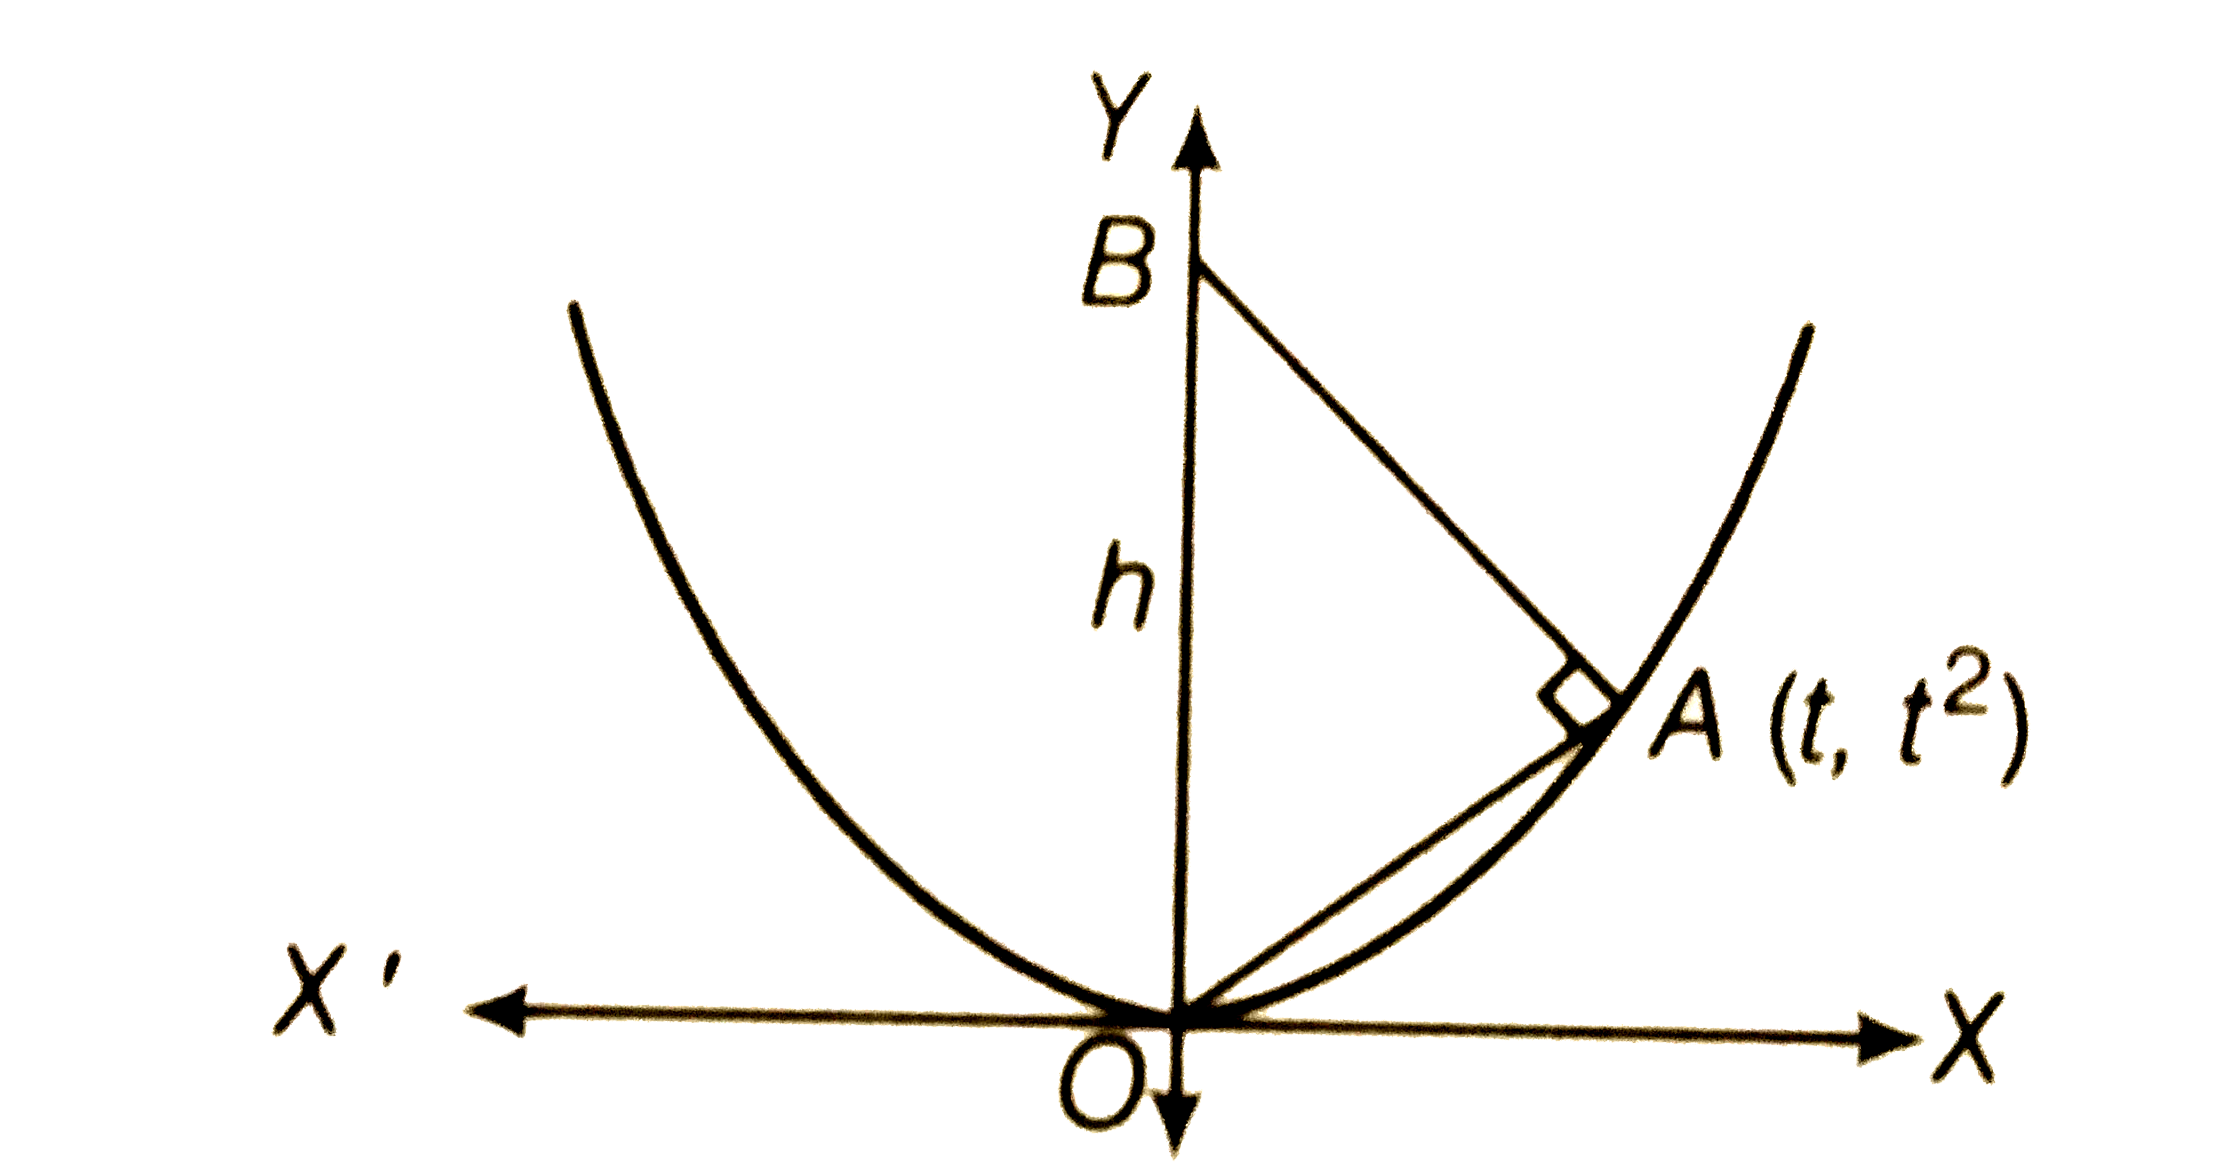 The figure shows a right triangle with its hypotenuse OB along the Y-axis and its vertex A on the parabola y=x^(2).      Let h represents the length of the hypotenuse which depends on the x-coordinate of the point A. The value of lim(t to 00)(h) is equal to